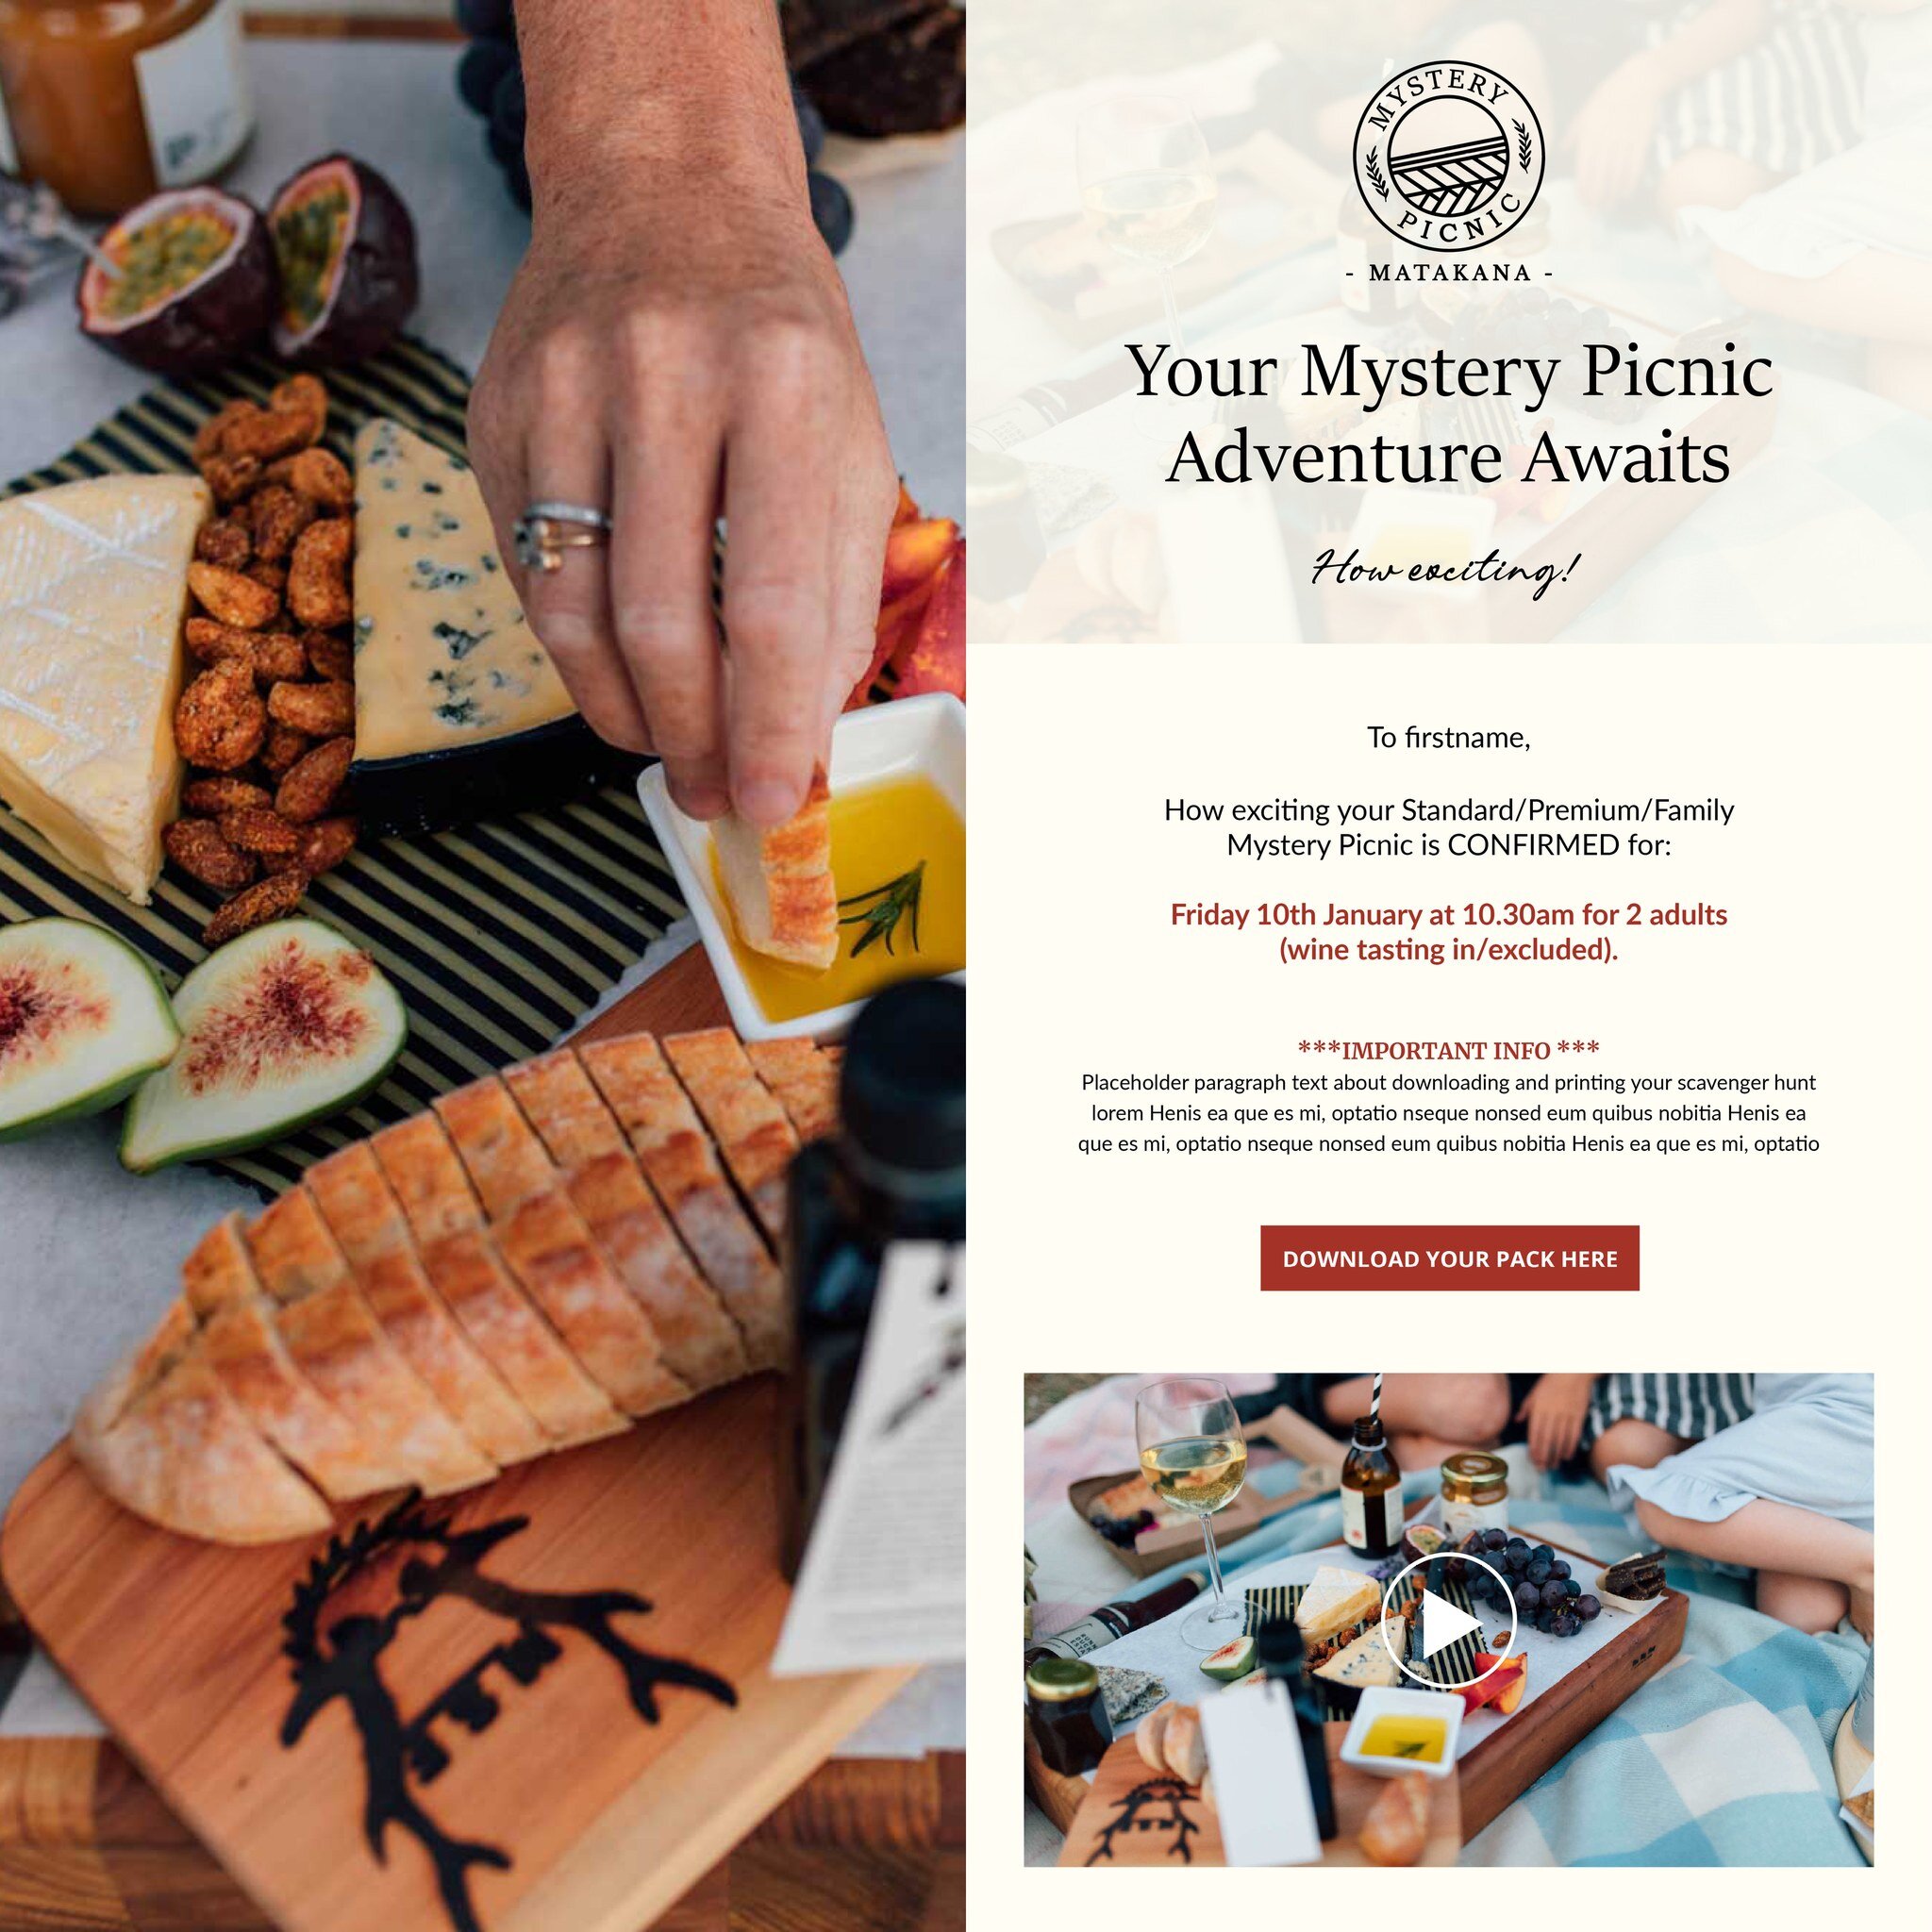 We thoroughly enjoyed being part of the creation of a whimsical journey for @mysterypicnicsnz . Every step of the way, from our thoughtfully designed email letters and printable packages to the artisan produce collected by family and friend groups al